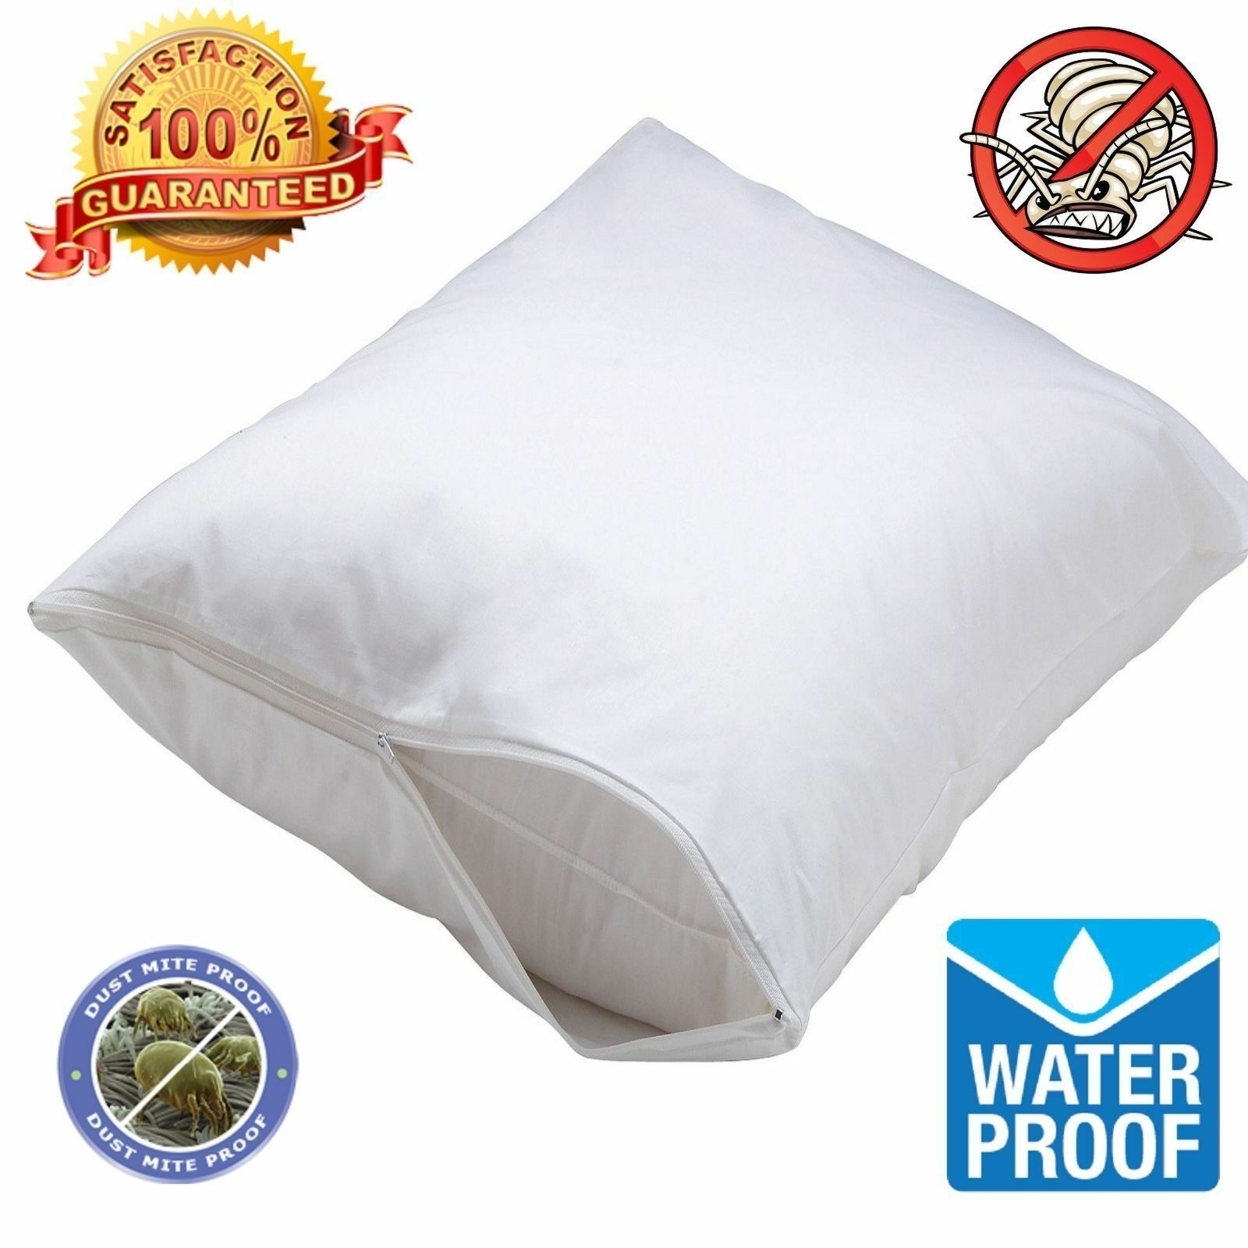 Zippered Fabric Waterproof & Bed Bug/Dust Mite Mattress Cover Protector - Queen